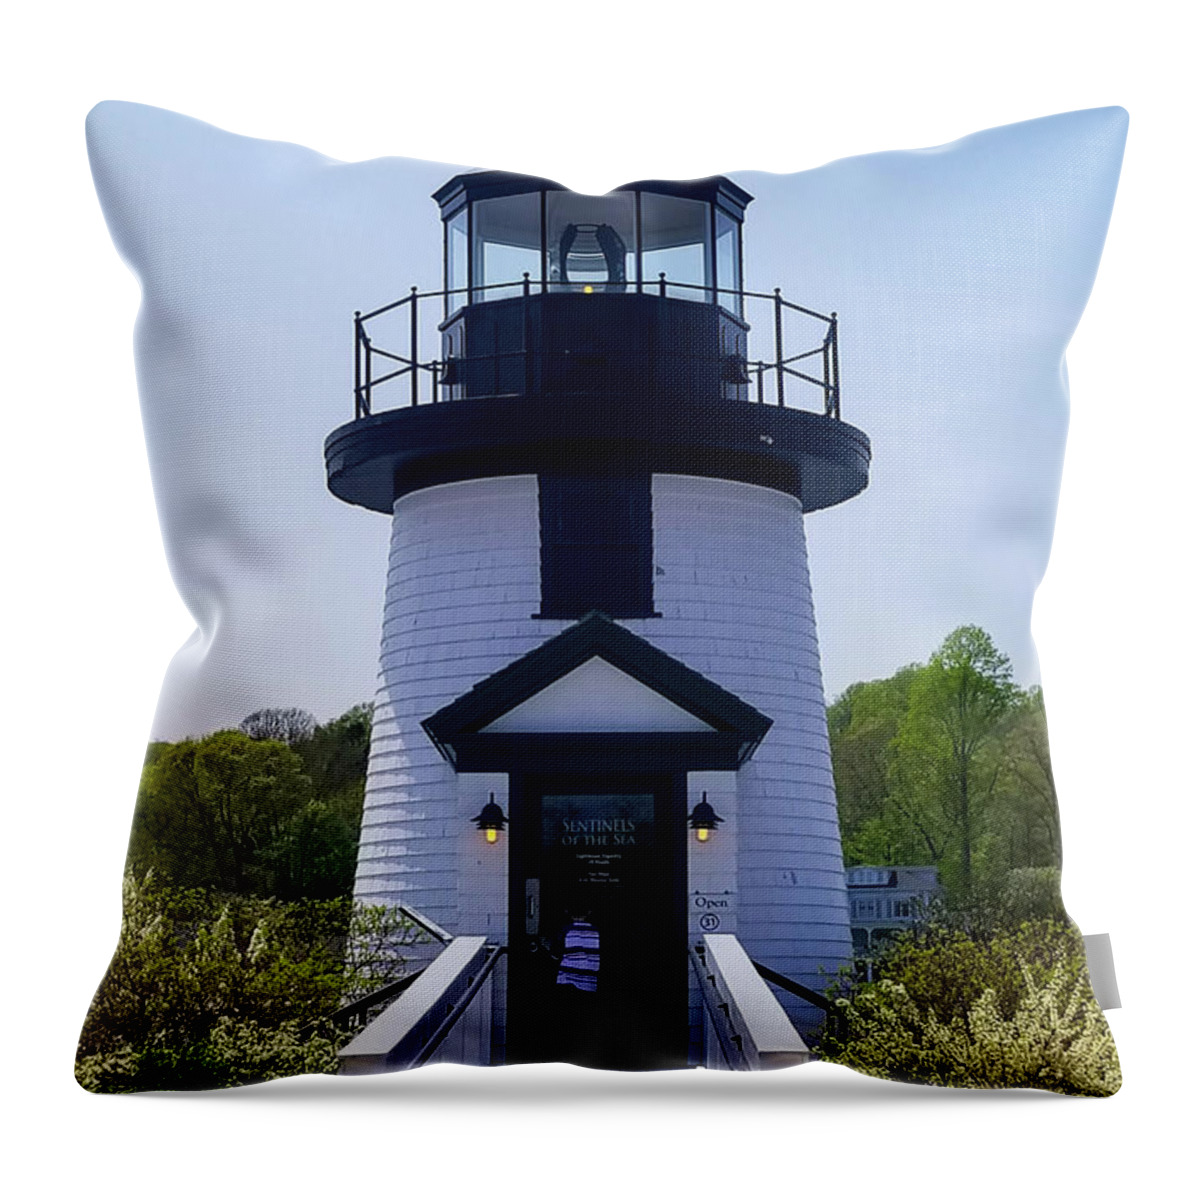 Mystic Seaport Throw Pillow featuring the photograph Mystic Seaport Light by Elizabeth M